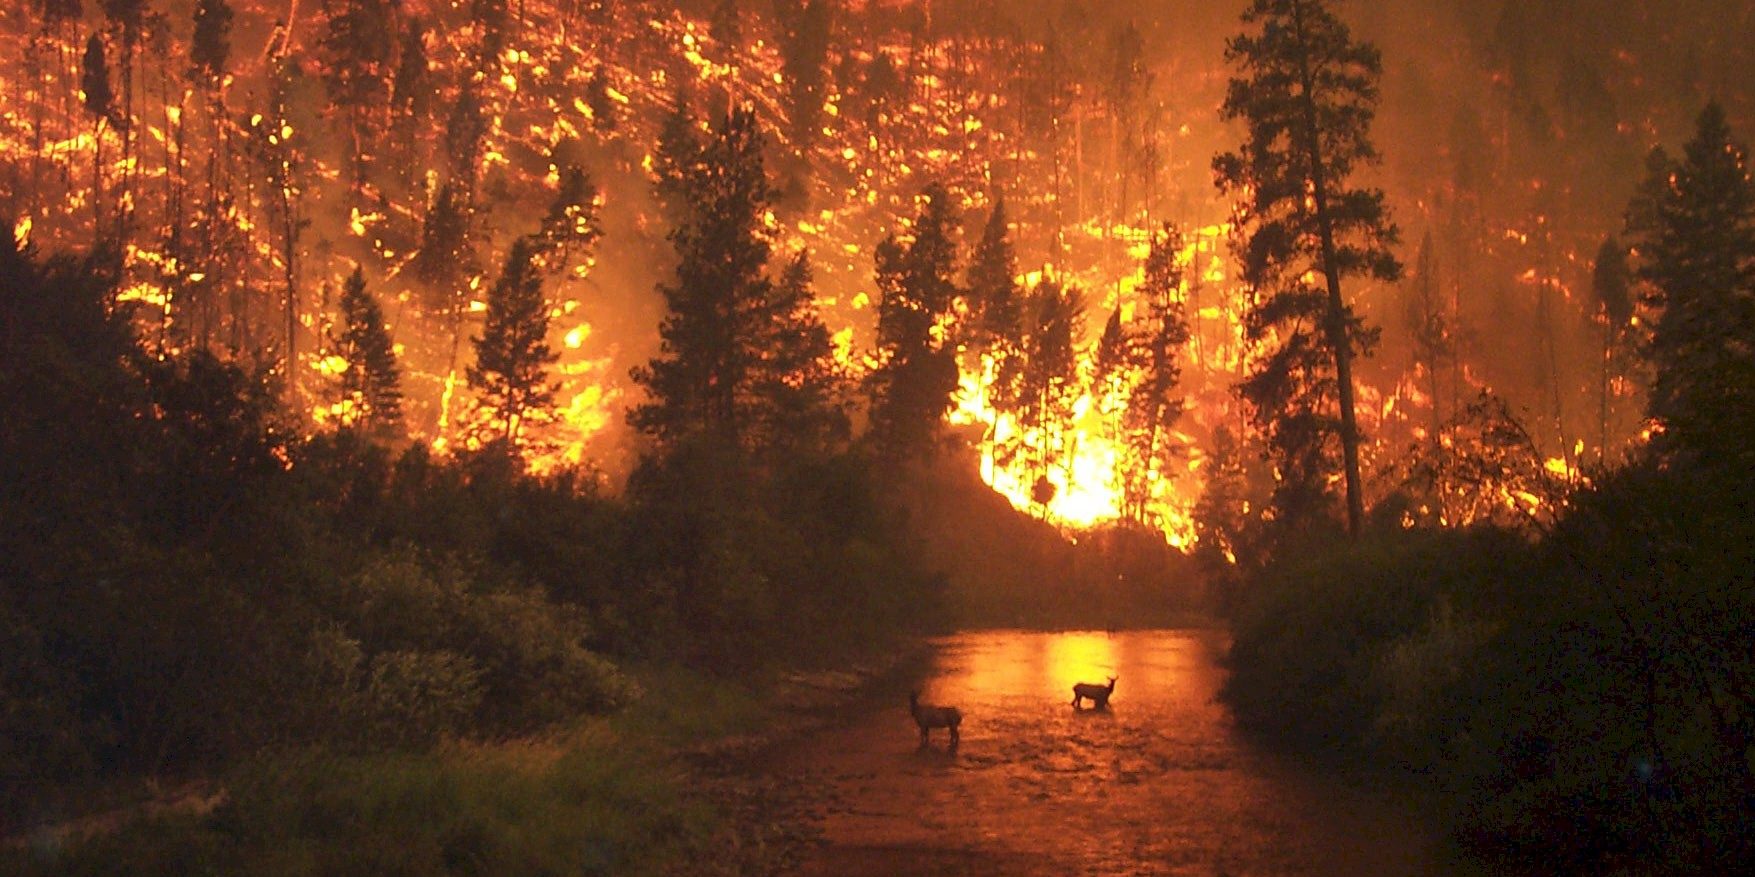 Elk wade in river with blazing forest fire in background